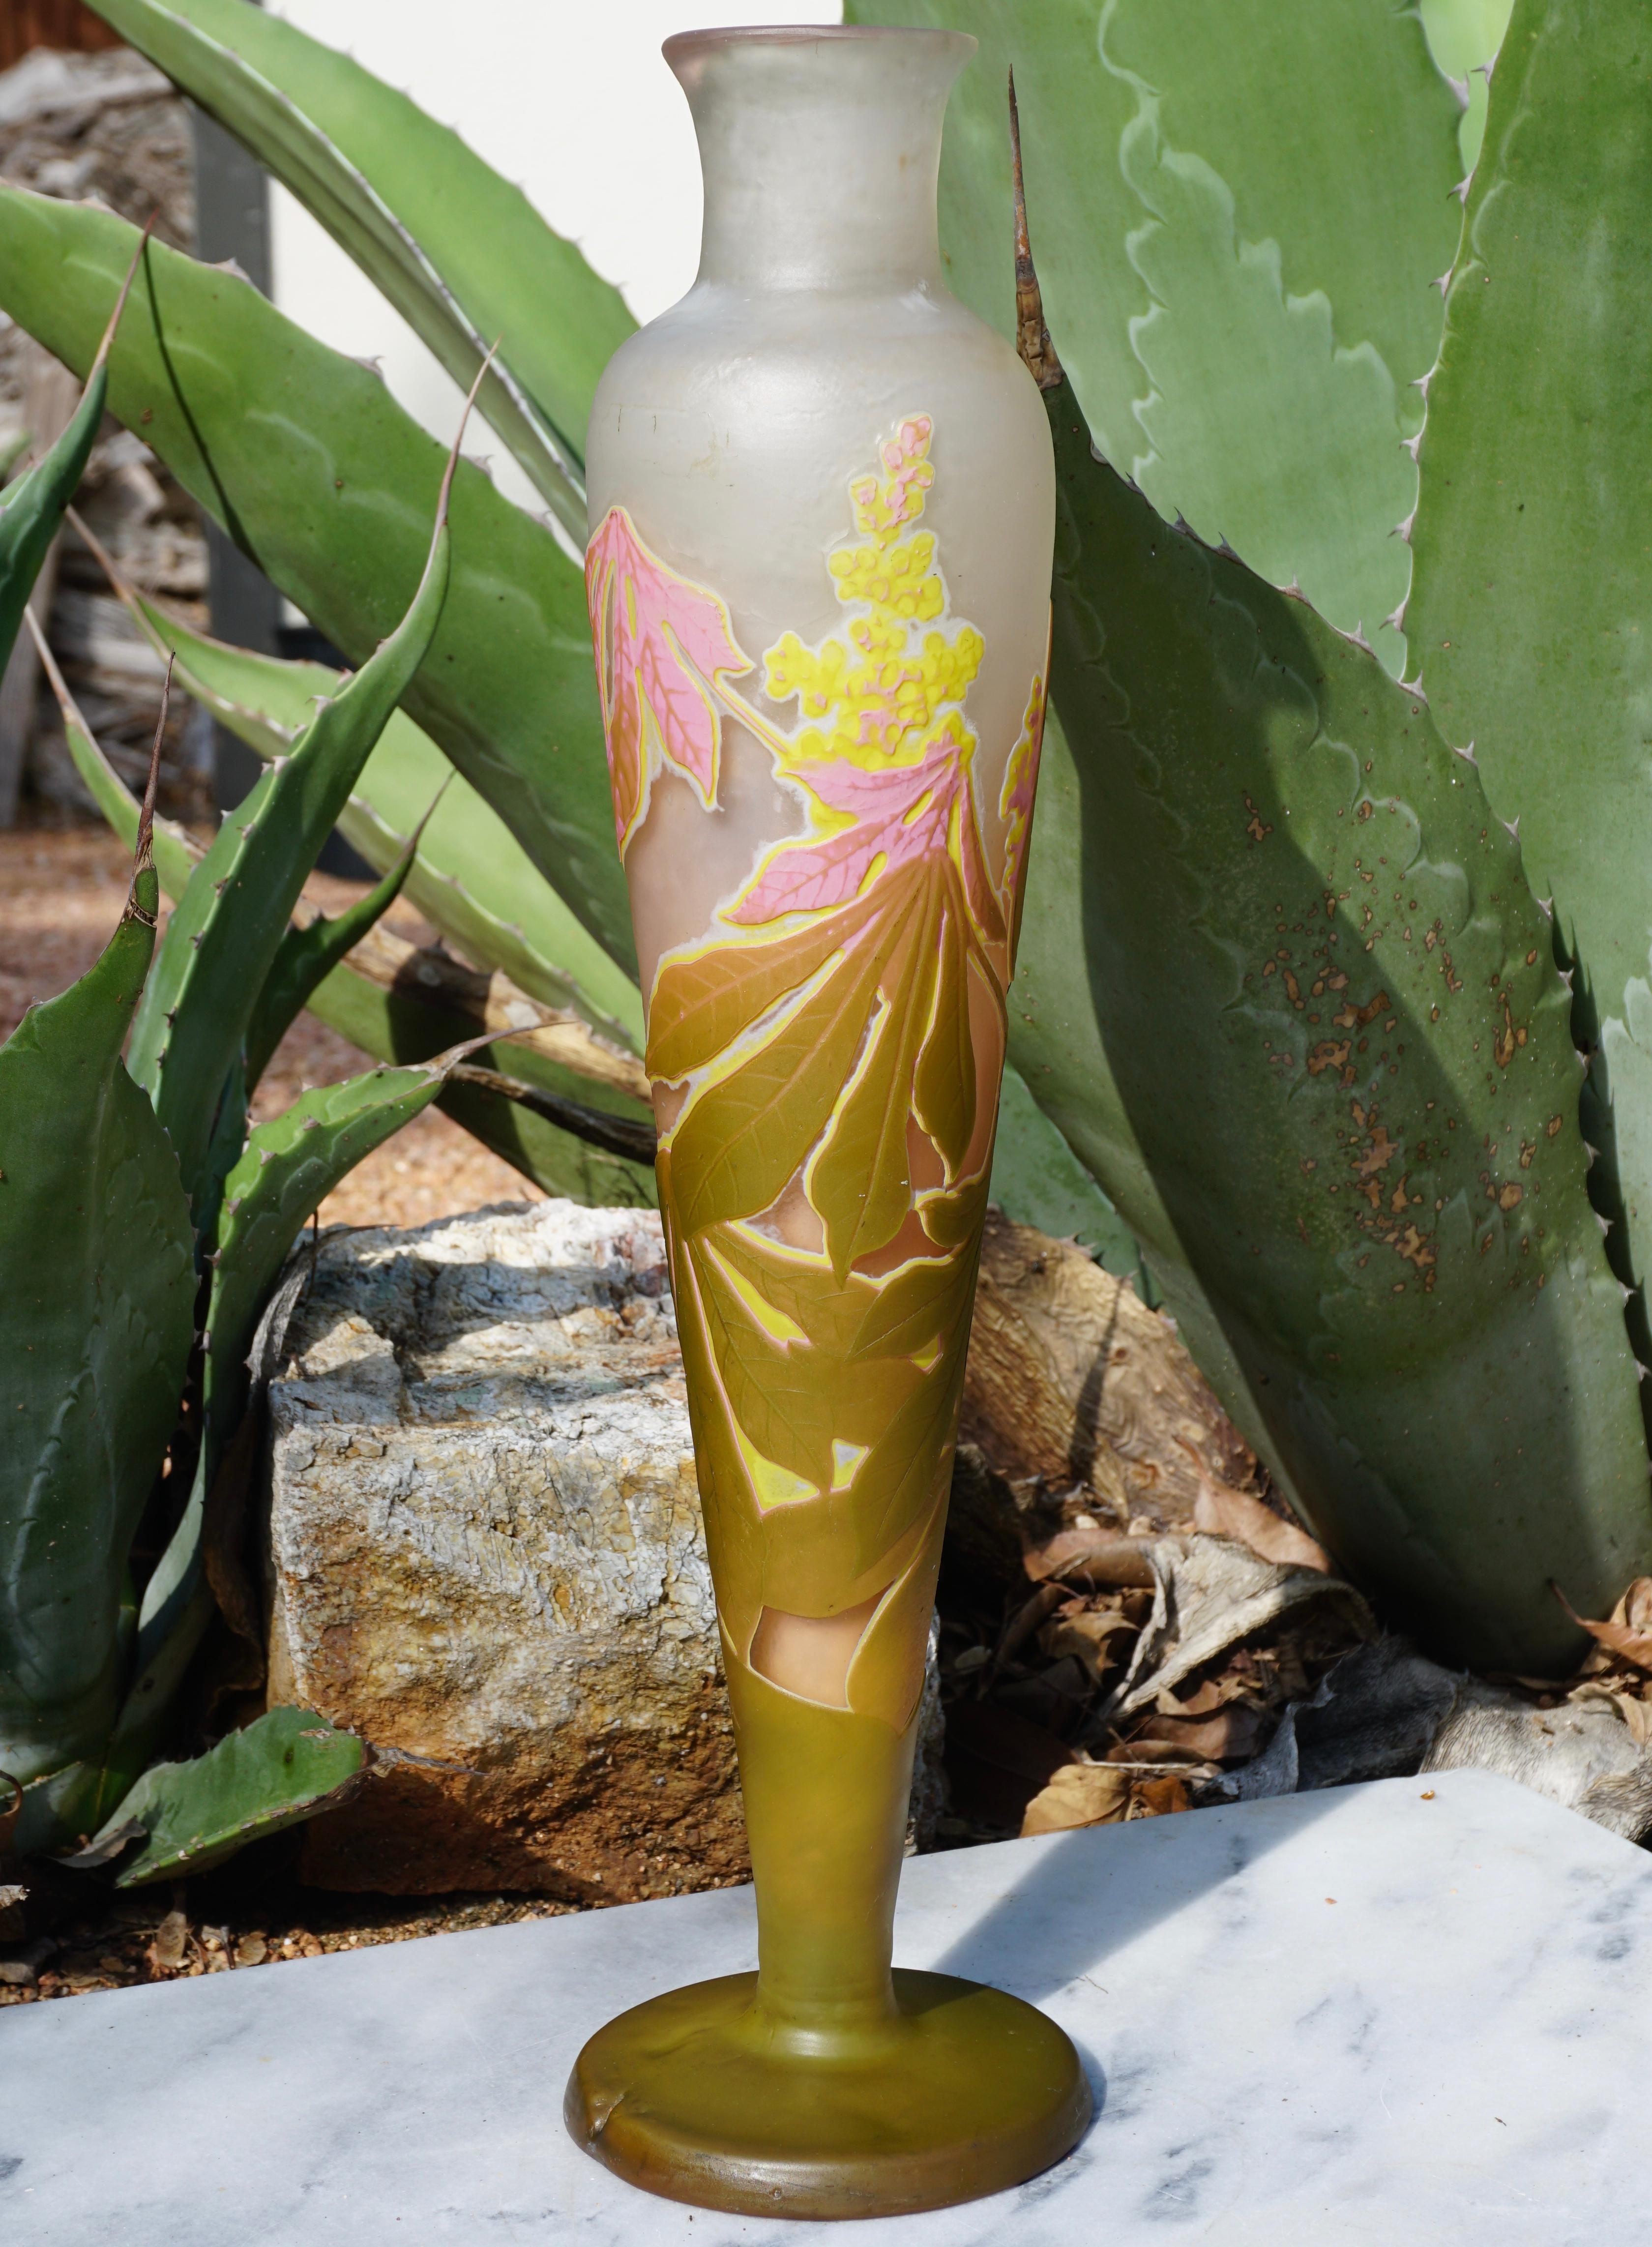 A stunning four color wheel carved and acid etched fat vase with pink, yellow, green and white on a cream background. The coloring is strong and the workmanship excellent. A truly explosive expression of flowering and seeding botanicals. Standing at